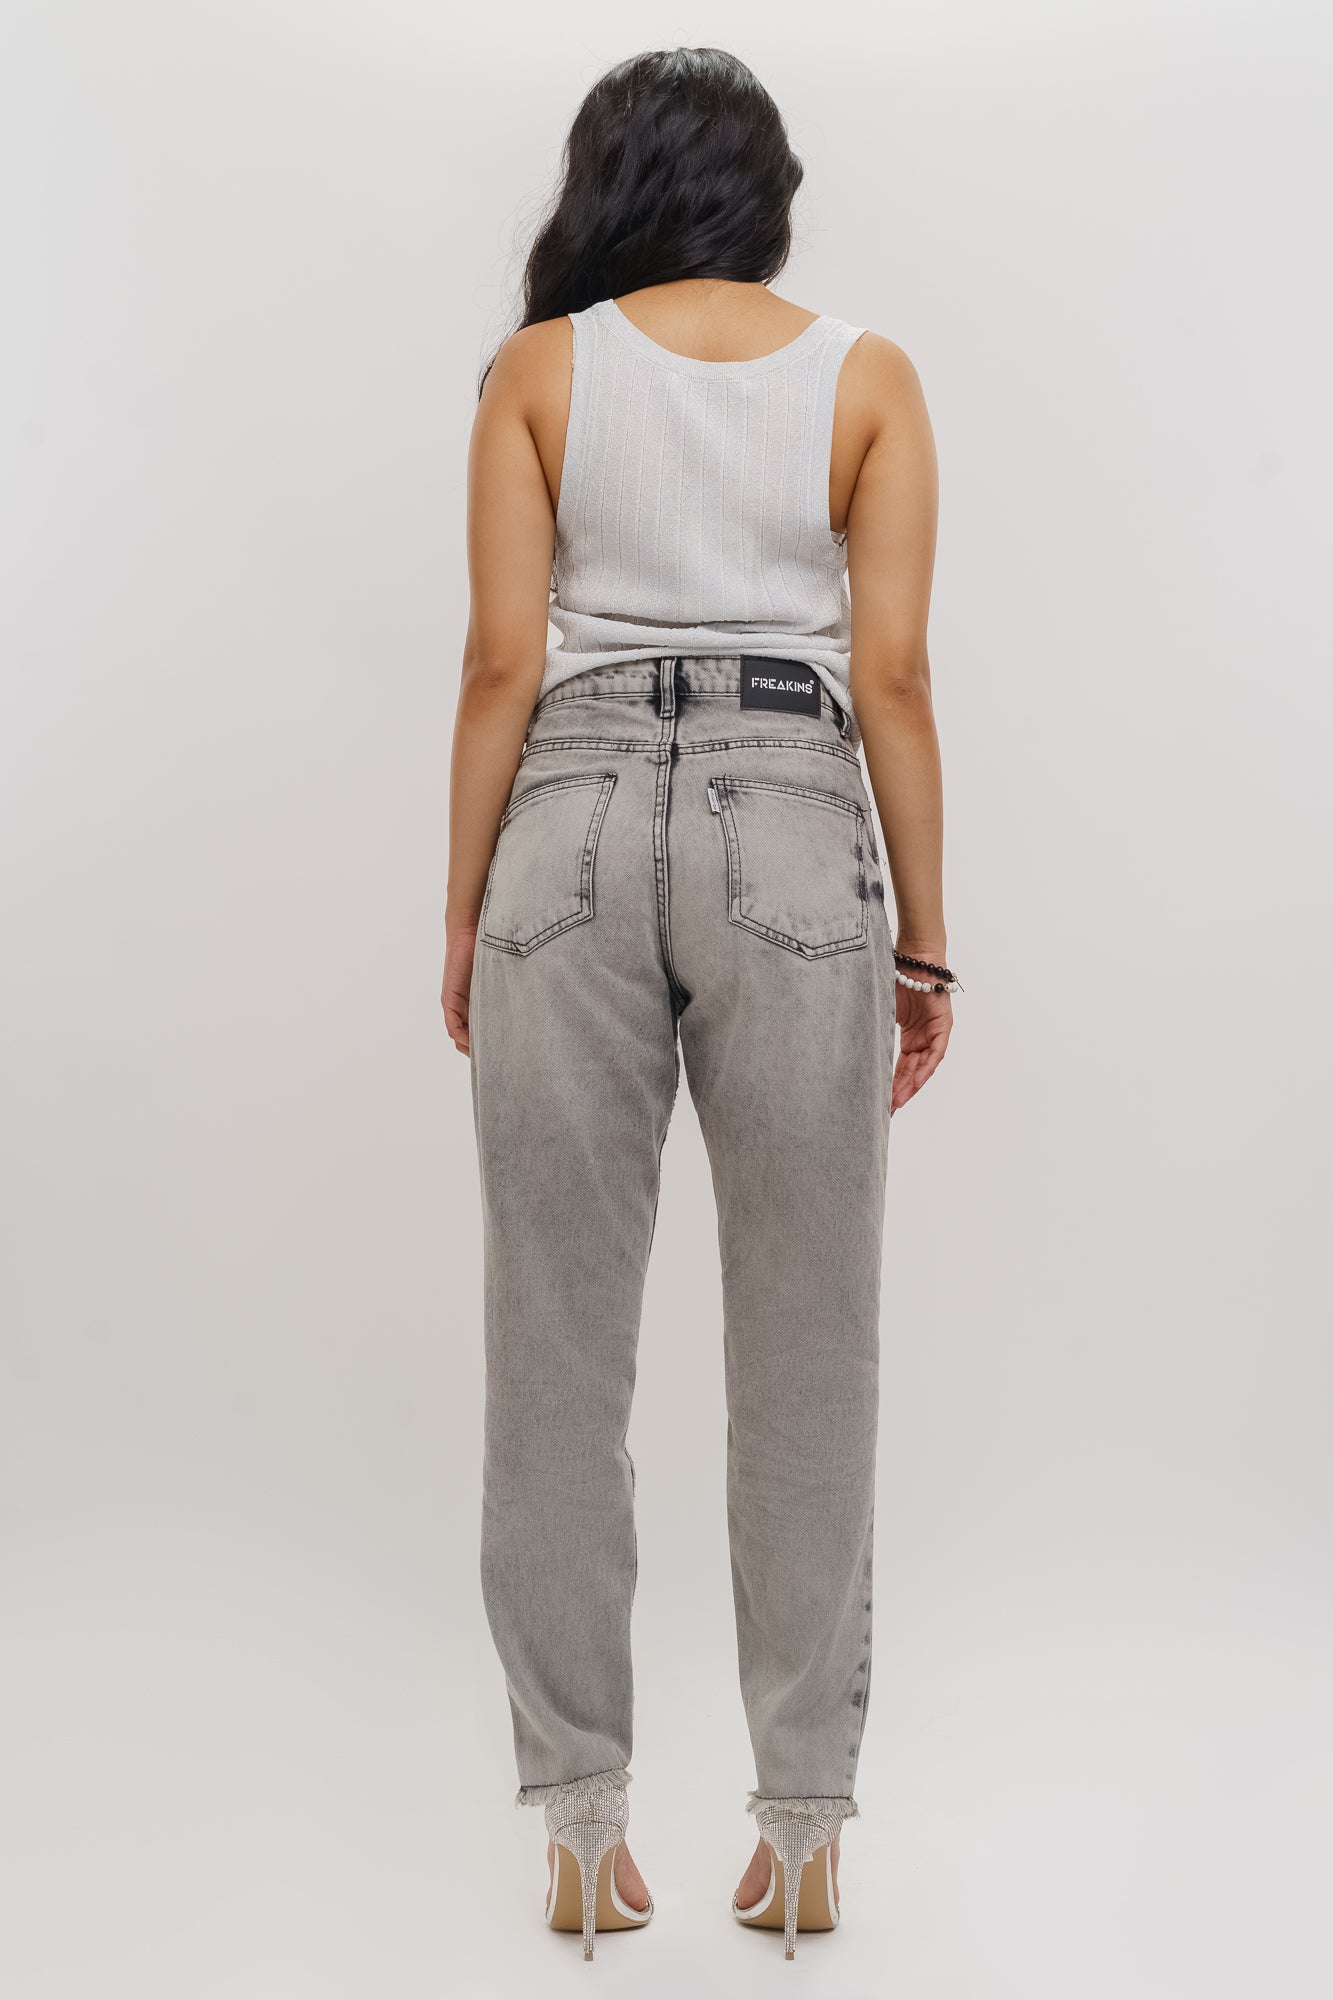 LIGHT CHARCOAL MOM JEANS